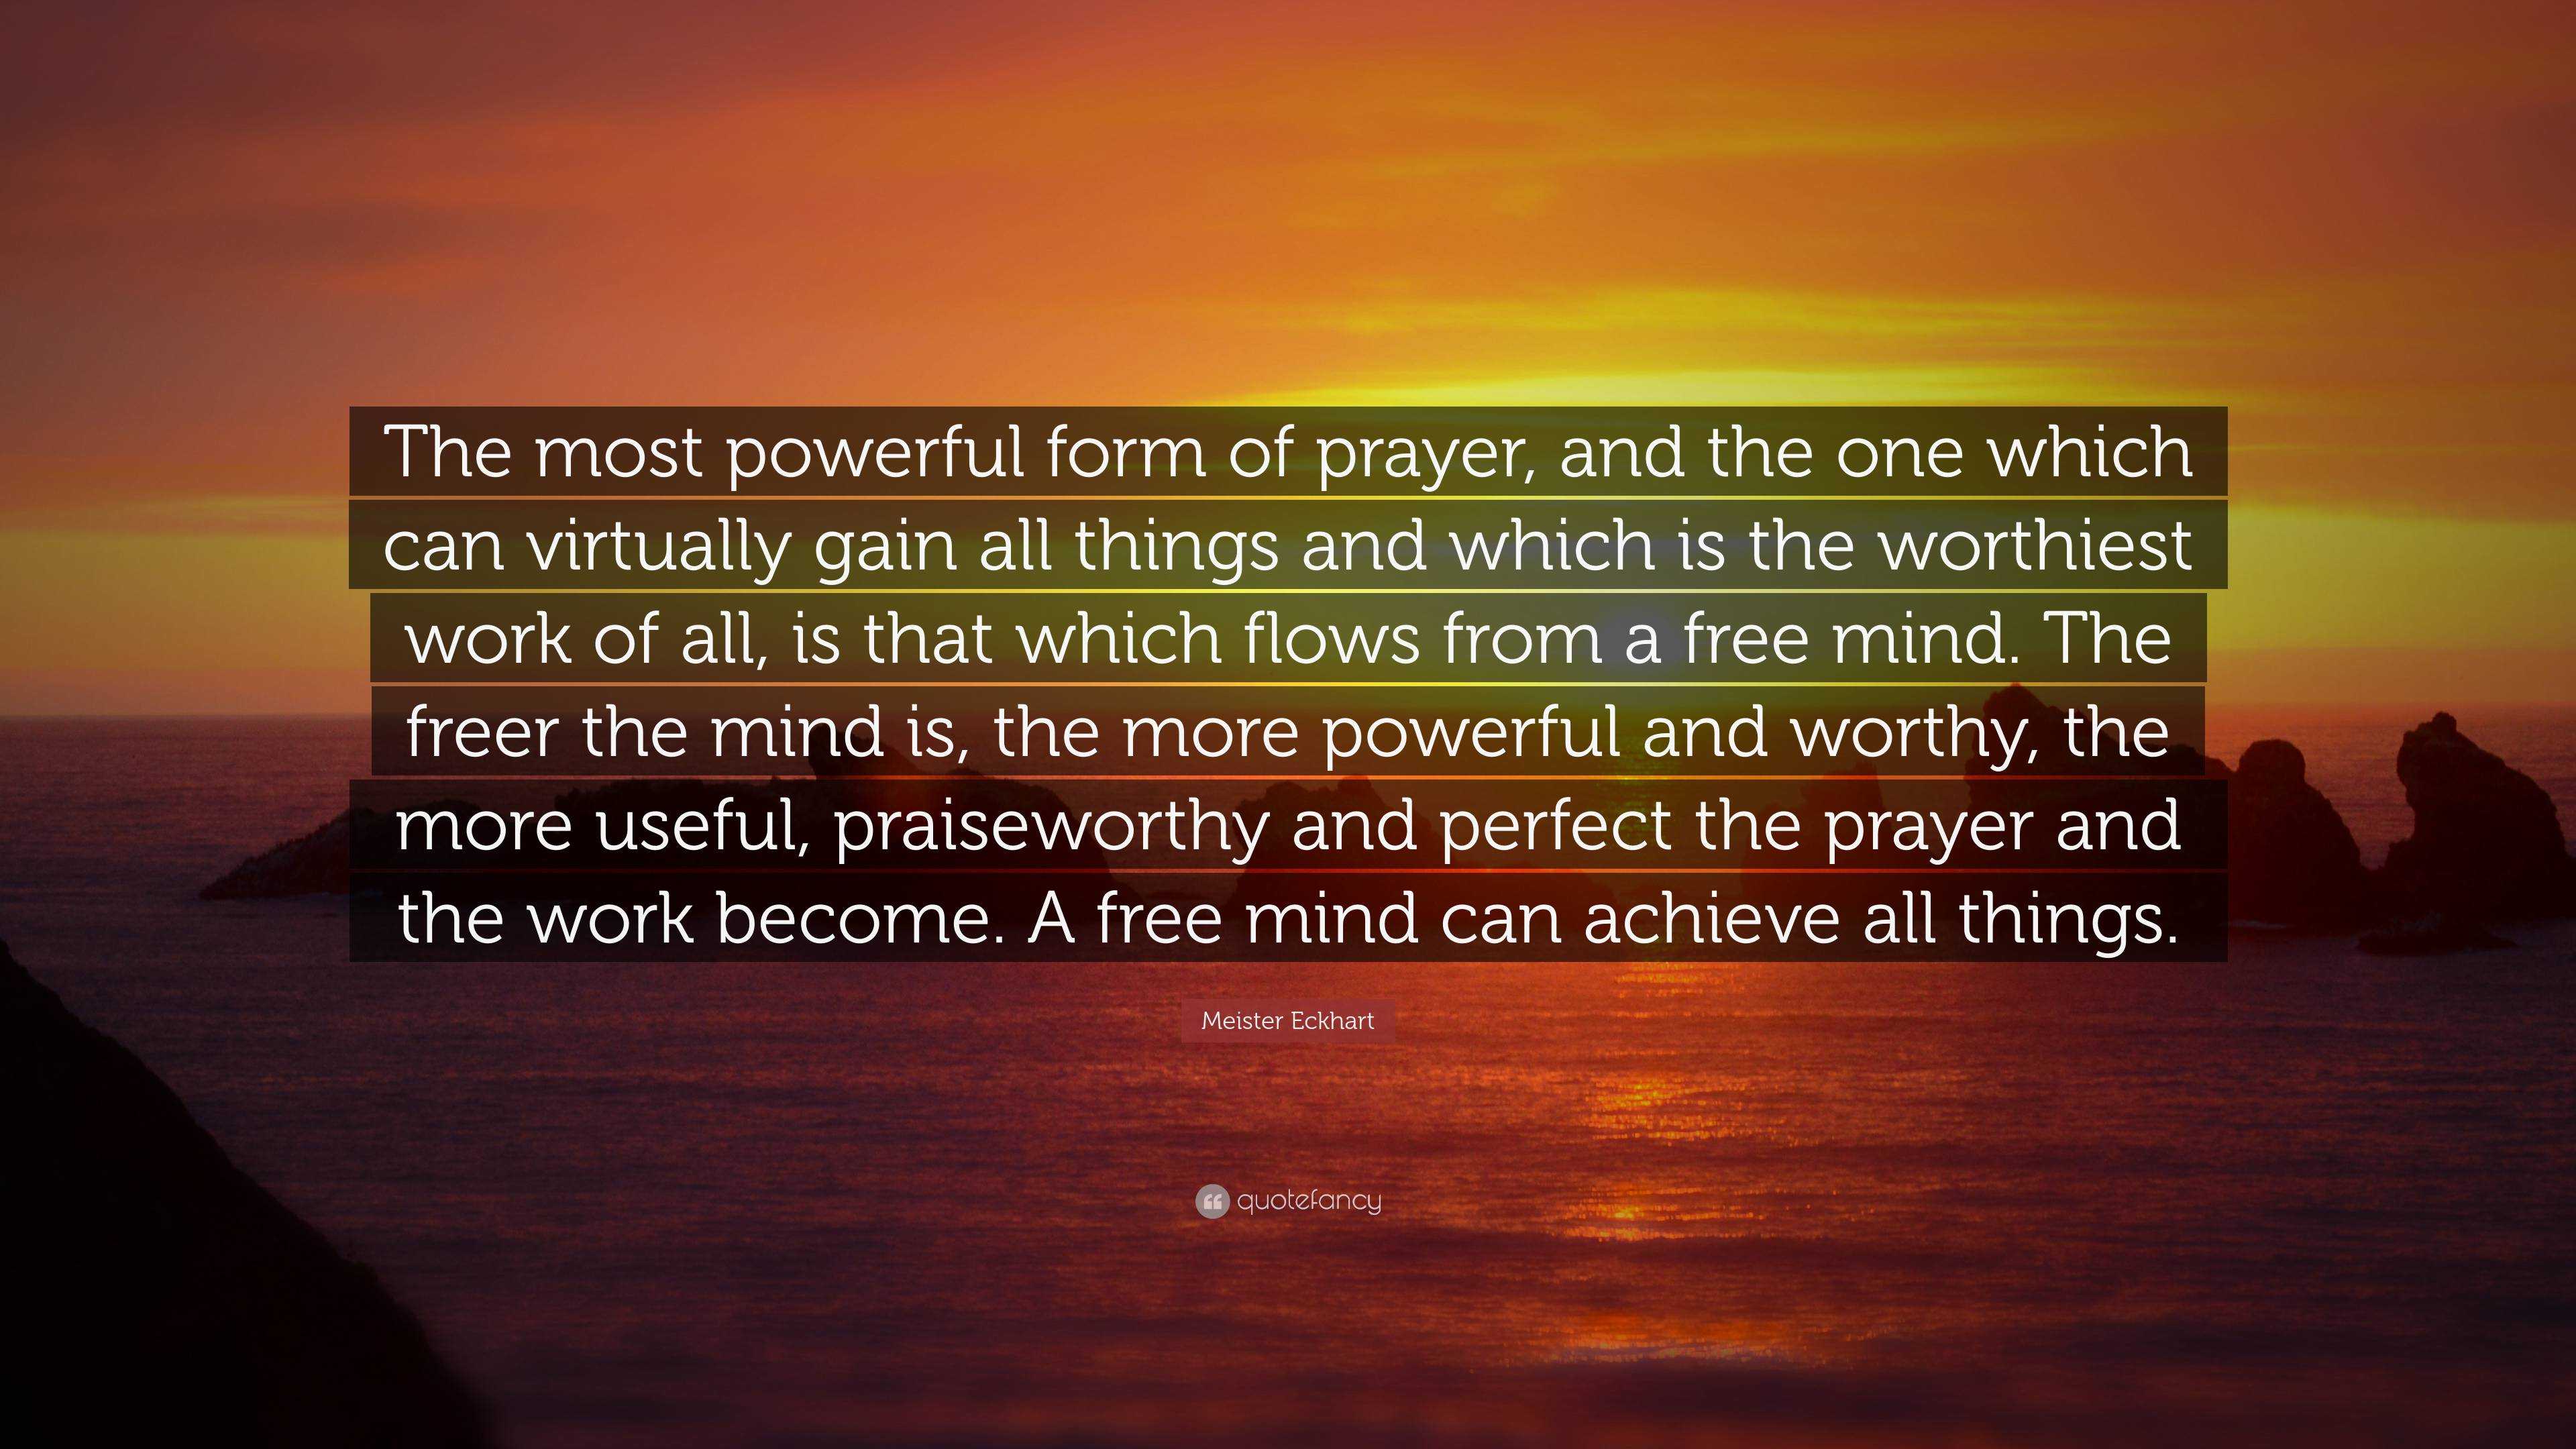 Meister Eckhart Quote: “The most powerful form of prayer, and the one ...